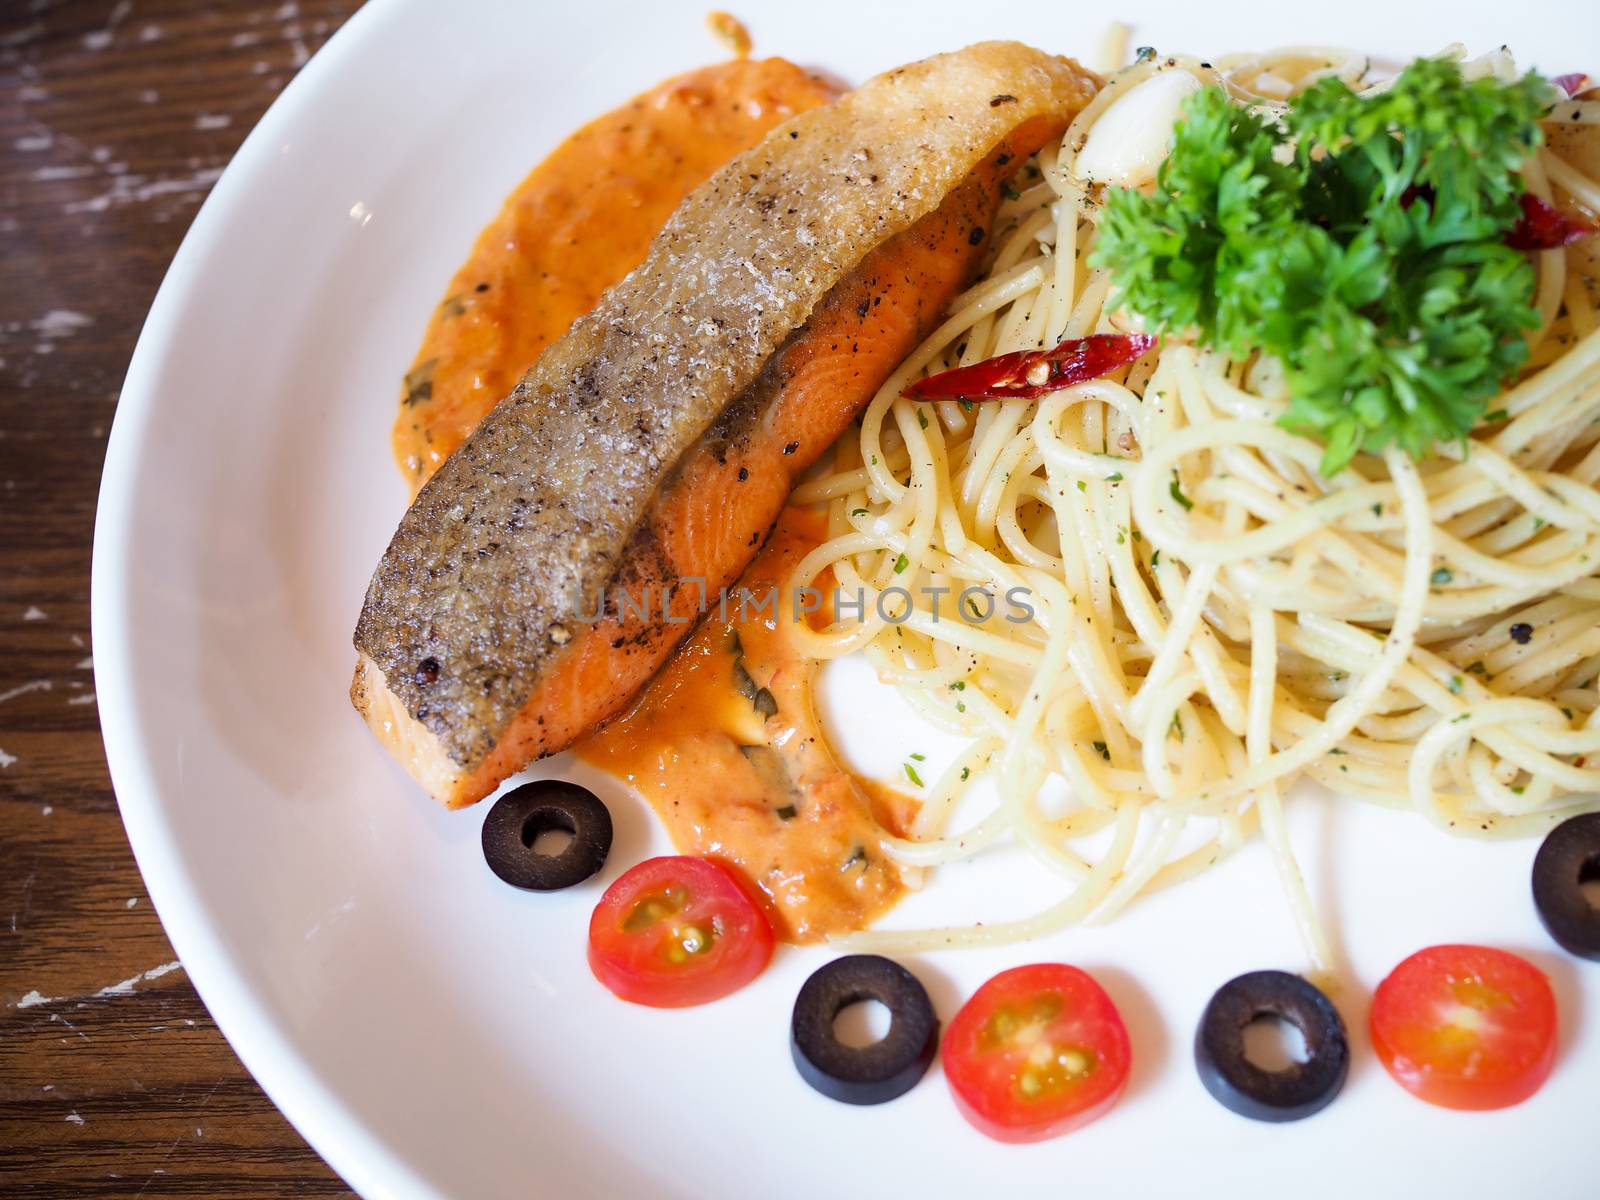 Food with spaghetti and salmon steak in white ceramic plate on table.